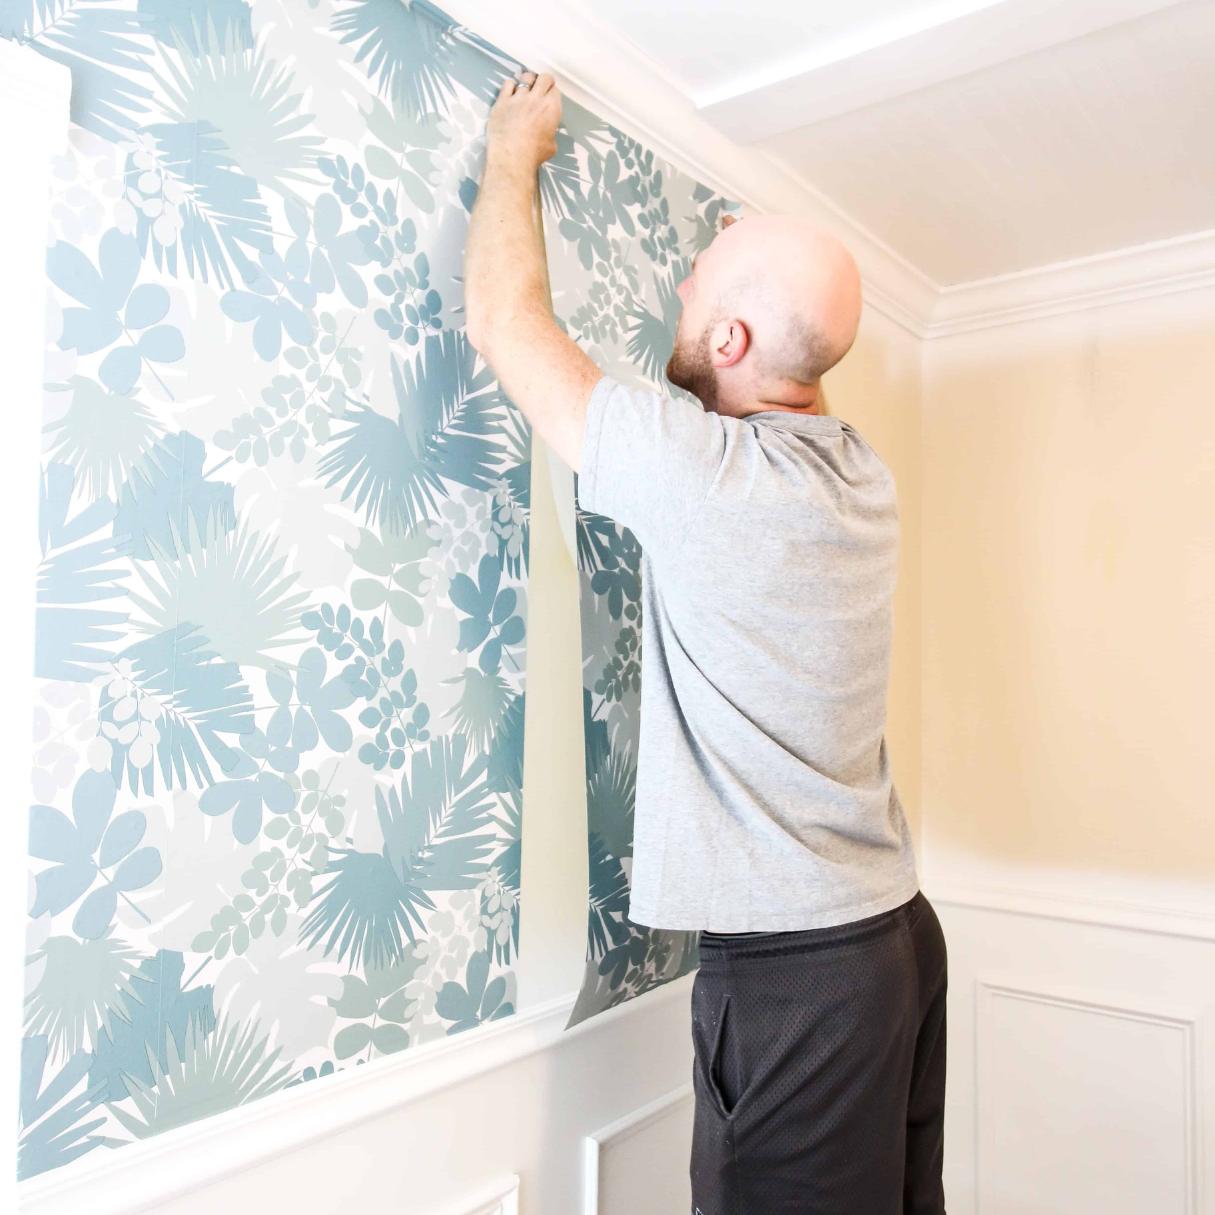 How To Apply Peel And Stick Wallpaper In Corners